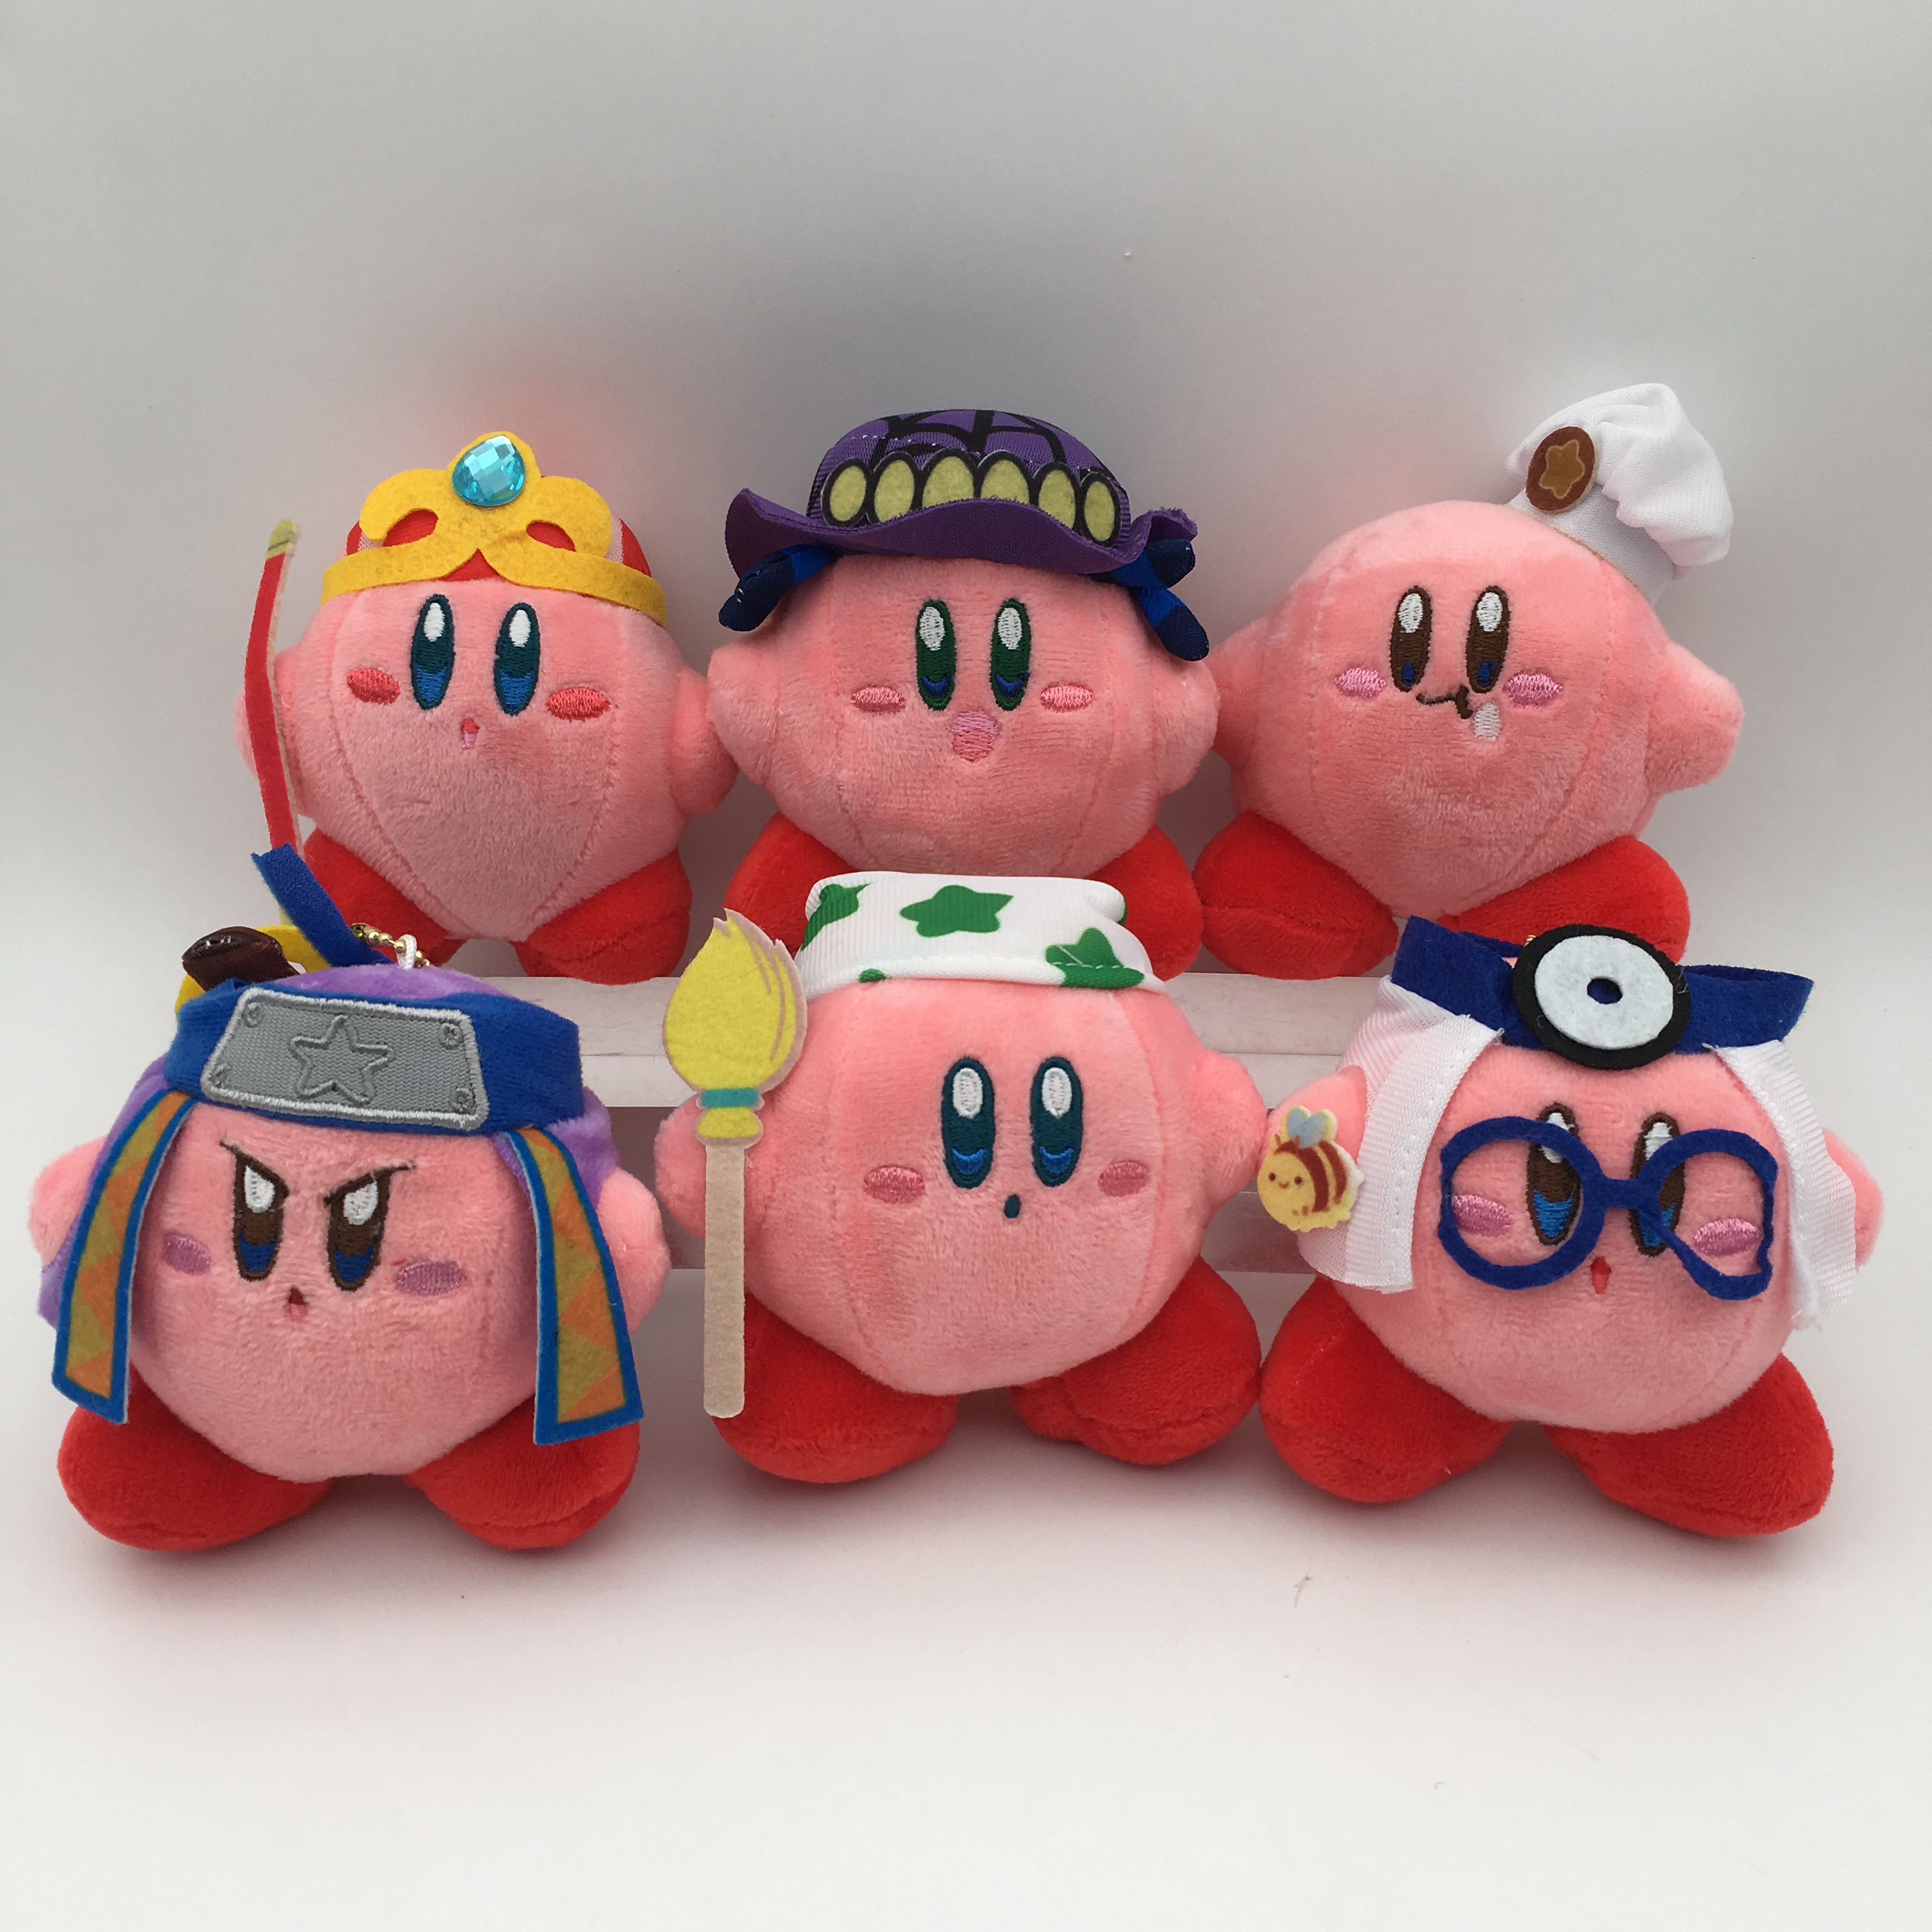 Kirby anime plush Toy，price for a set ofr 10 pcs,10cm